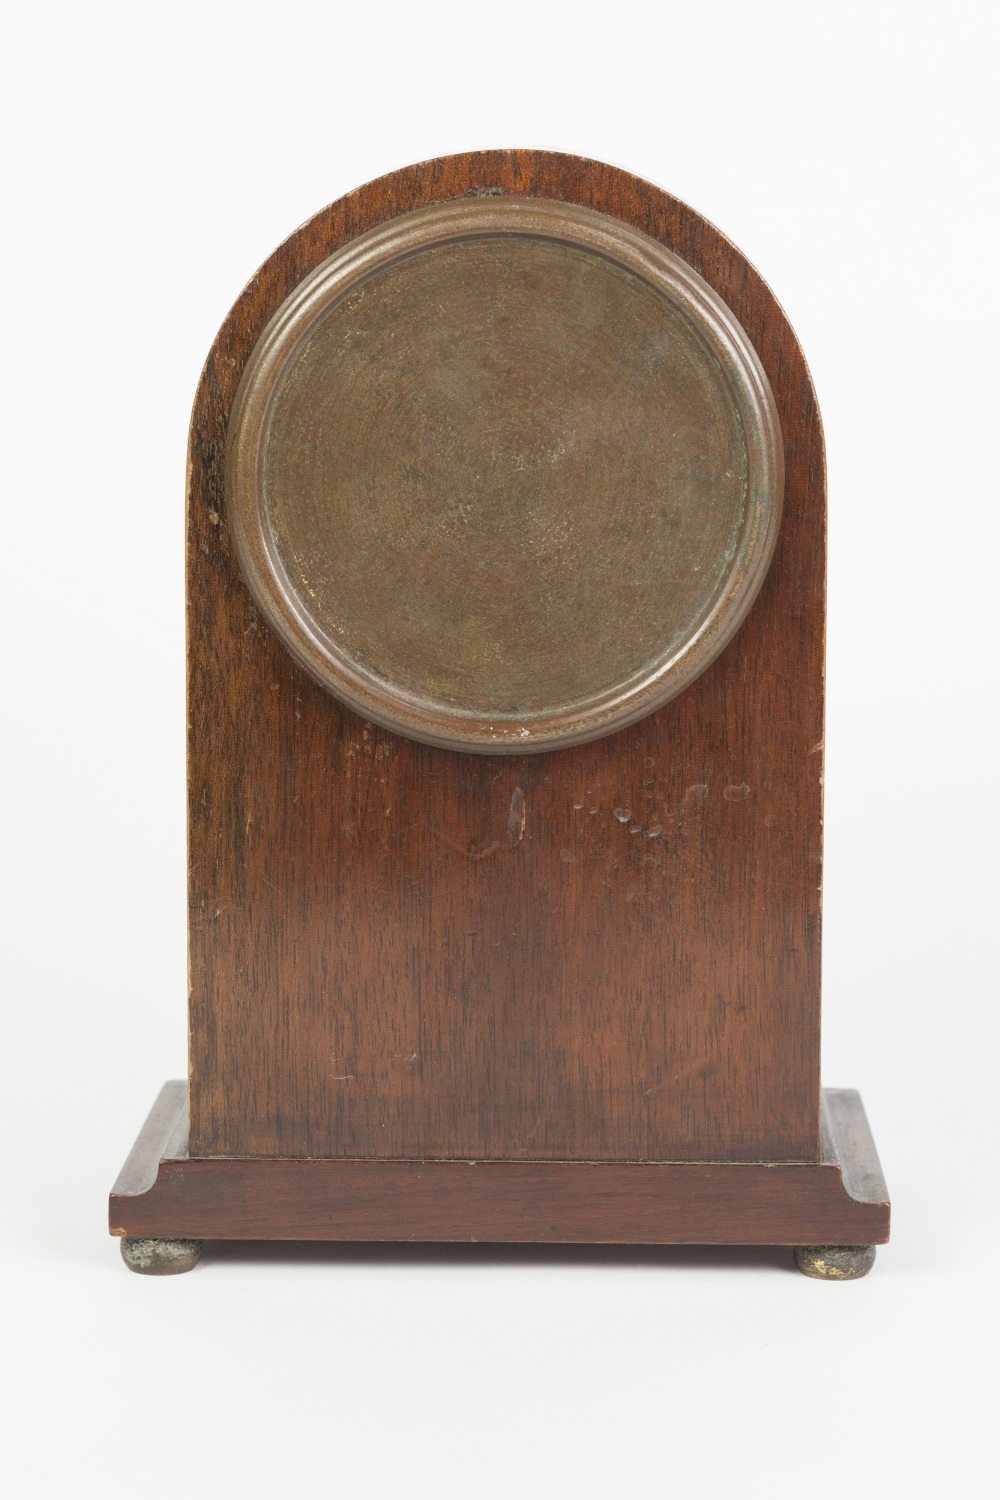 EDWARDIAN INLAID MAHOGANY SMALL MANTLE CLOCK, the 3 ¼" Roam dial powered by a drum shaped movement - Image 3 of 3